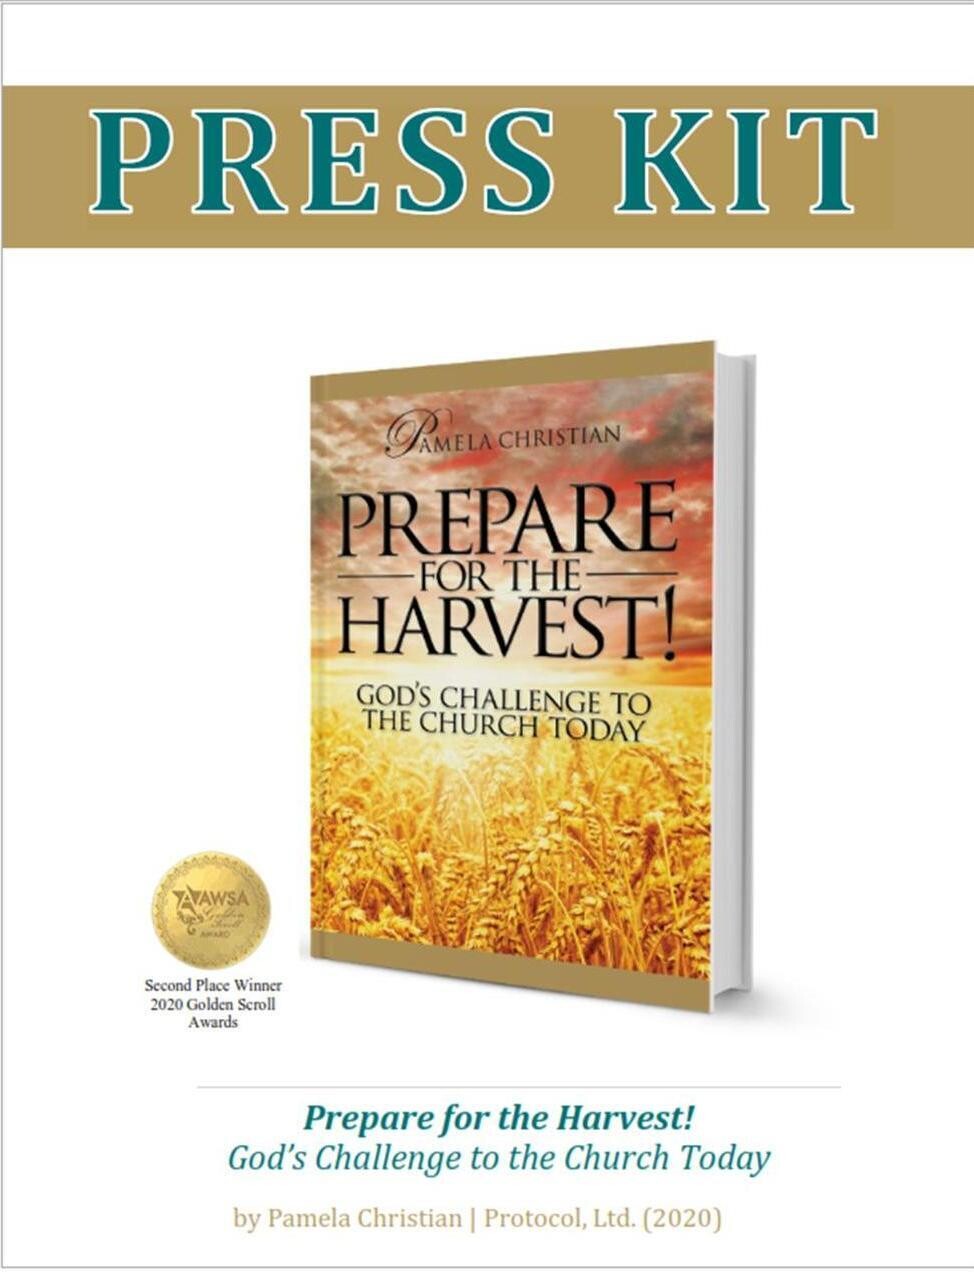 Prepare for the Harvest! God's Challenge to the Church Today Press Kit